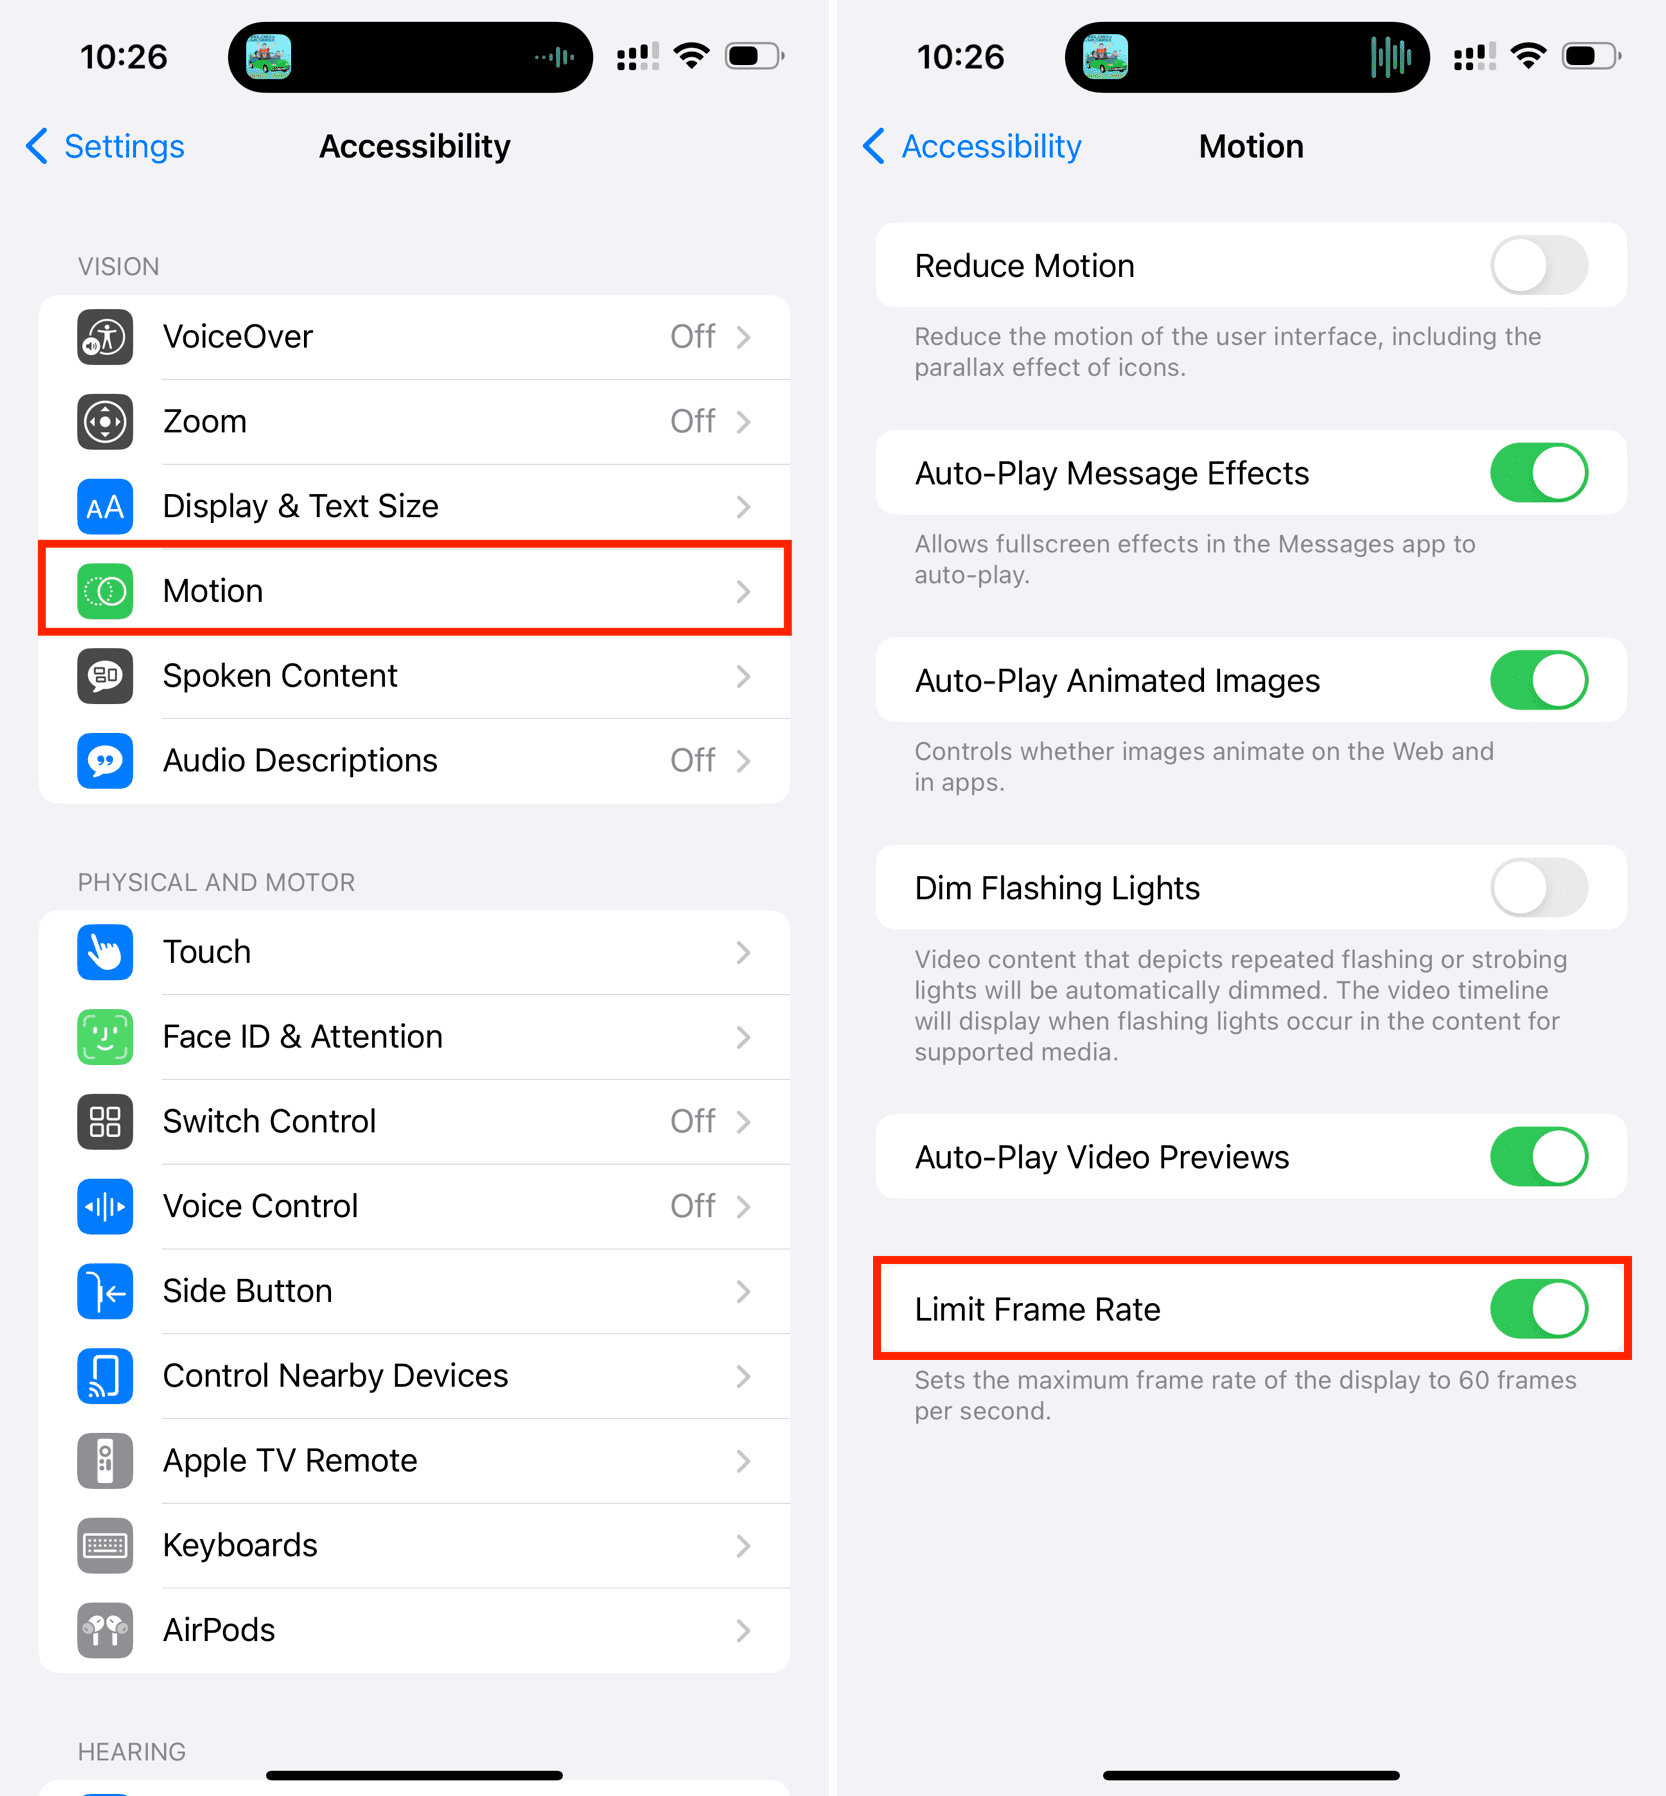 Turn on Limit Frame Rate in iPhone Motion settings to switch off 120Hz refresh rate